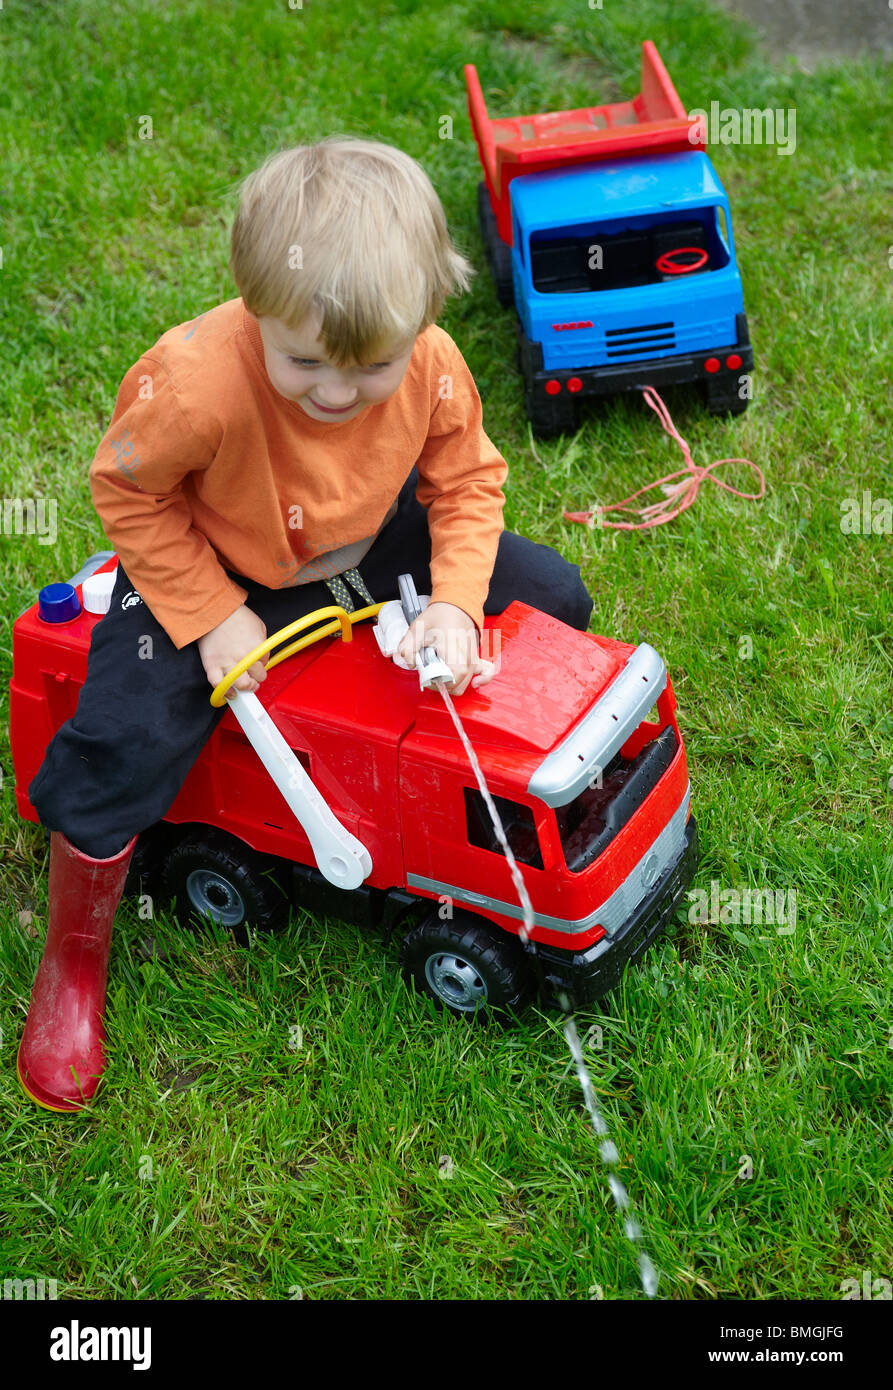 Boy With Toy Fire Engine on garden lawn Stock Photo